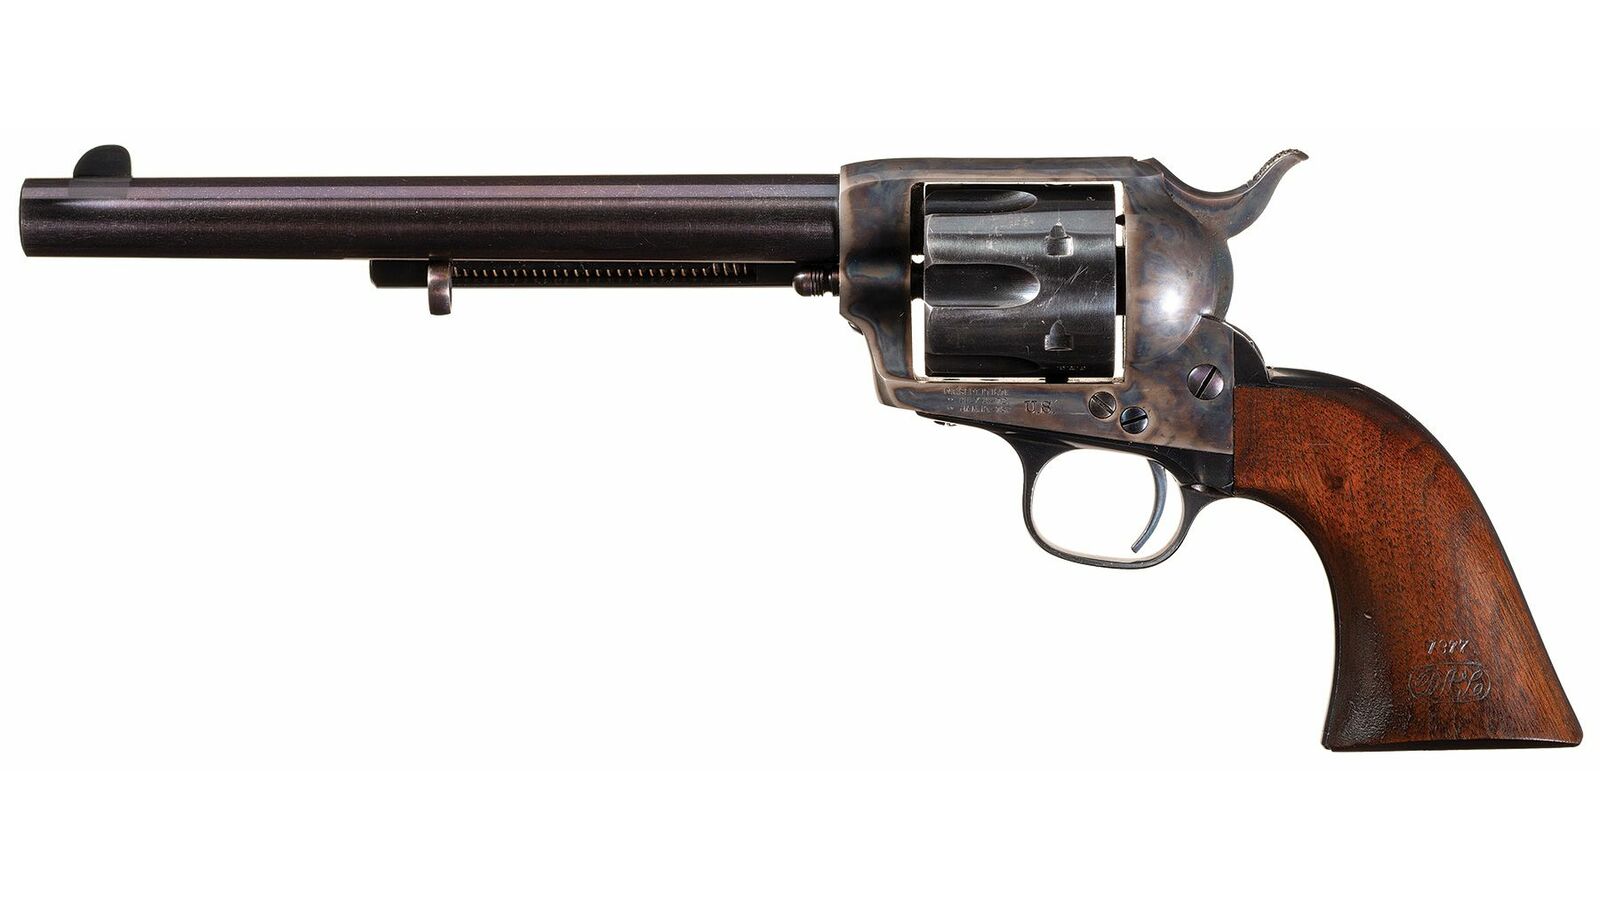 U.S. Stamped Colt Cavalry Model Single Action Army Revolver | Rock 